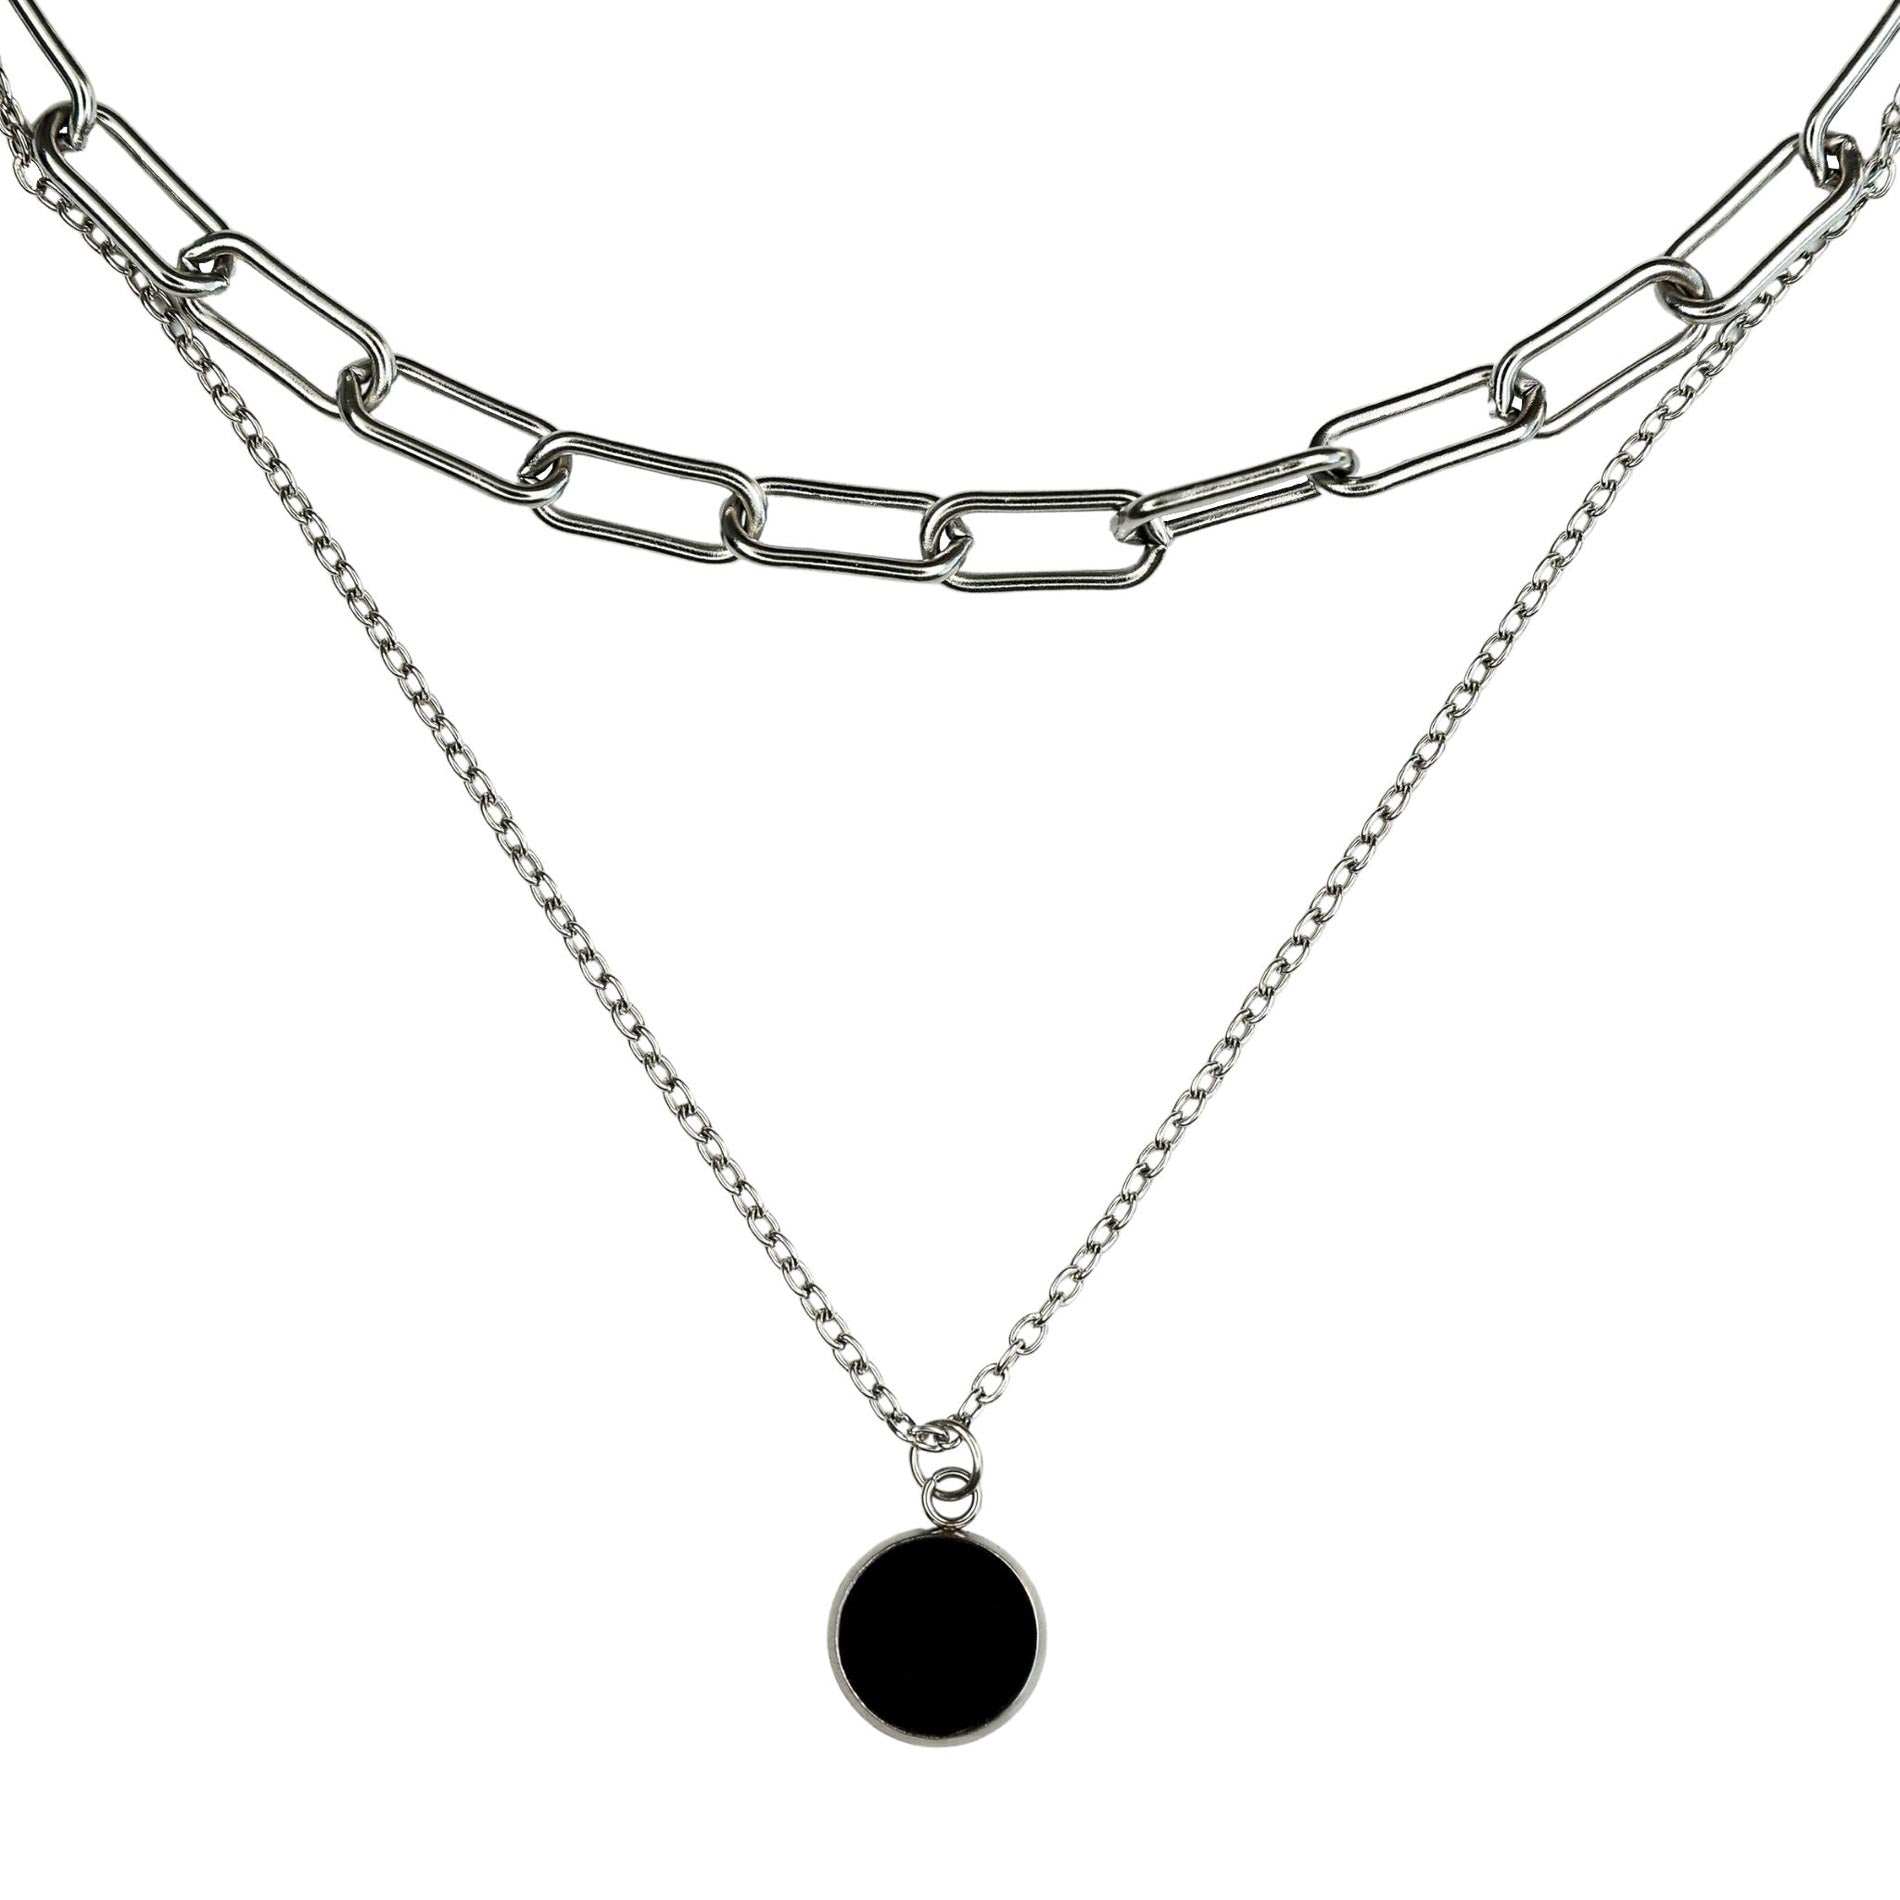 DOUBLE TROUBLE – multi tiered vinyl necklace